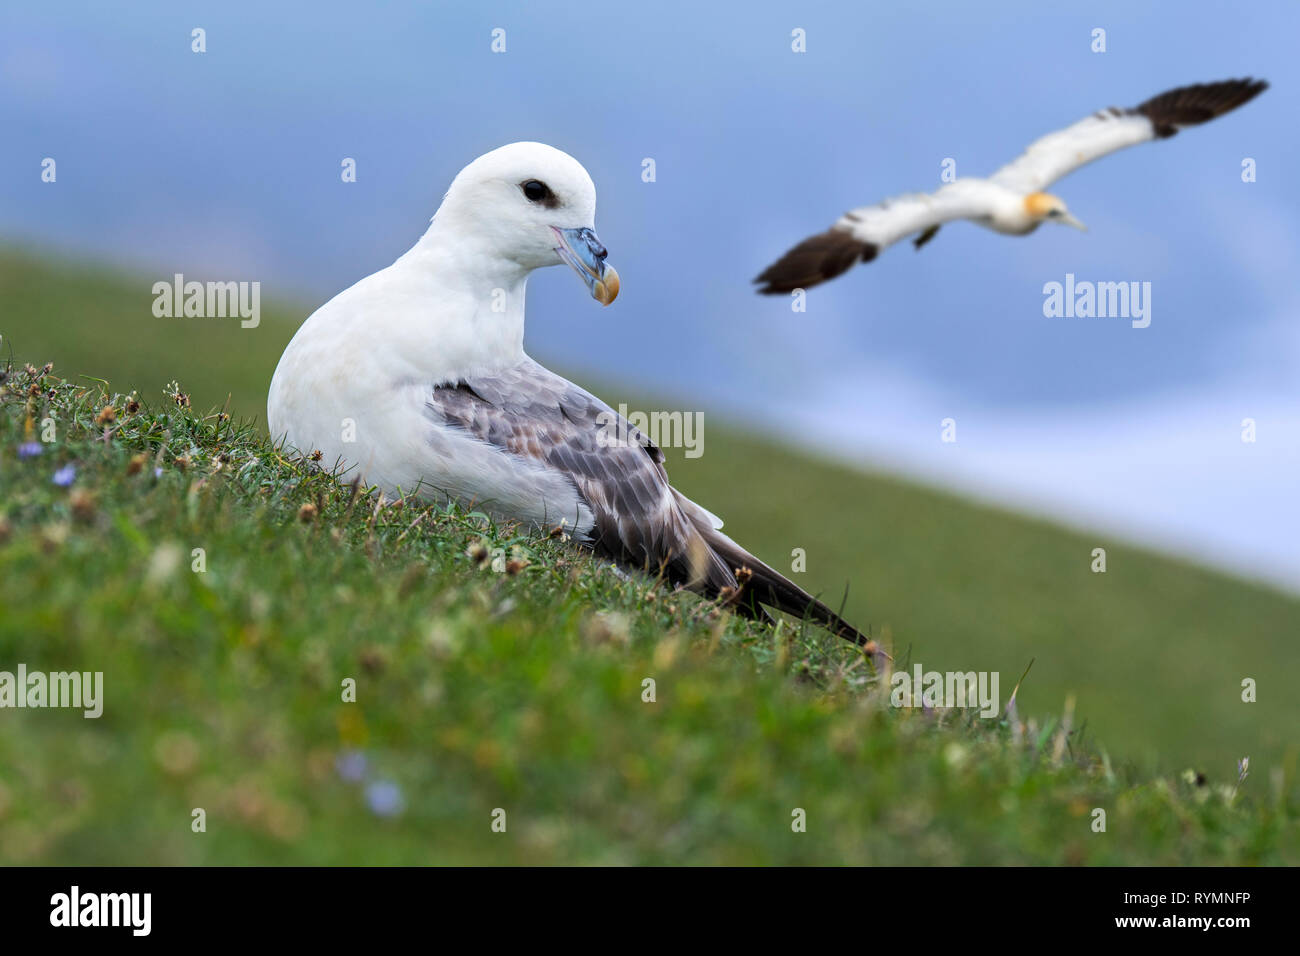 Northern fulmar / Arctic fulmar (Fulmarus glacialis) resting on sea cliff top and gannet soaring by at seabird colony, Scotland, UK Stock Photo